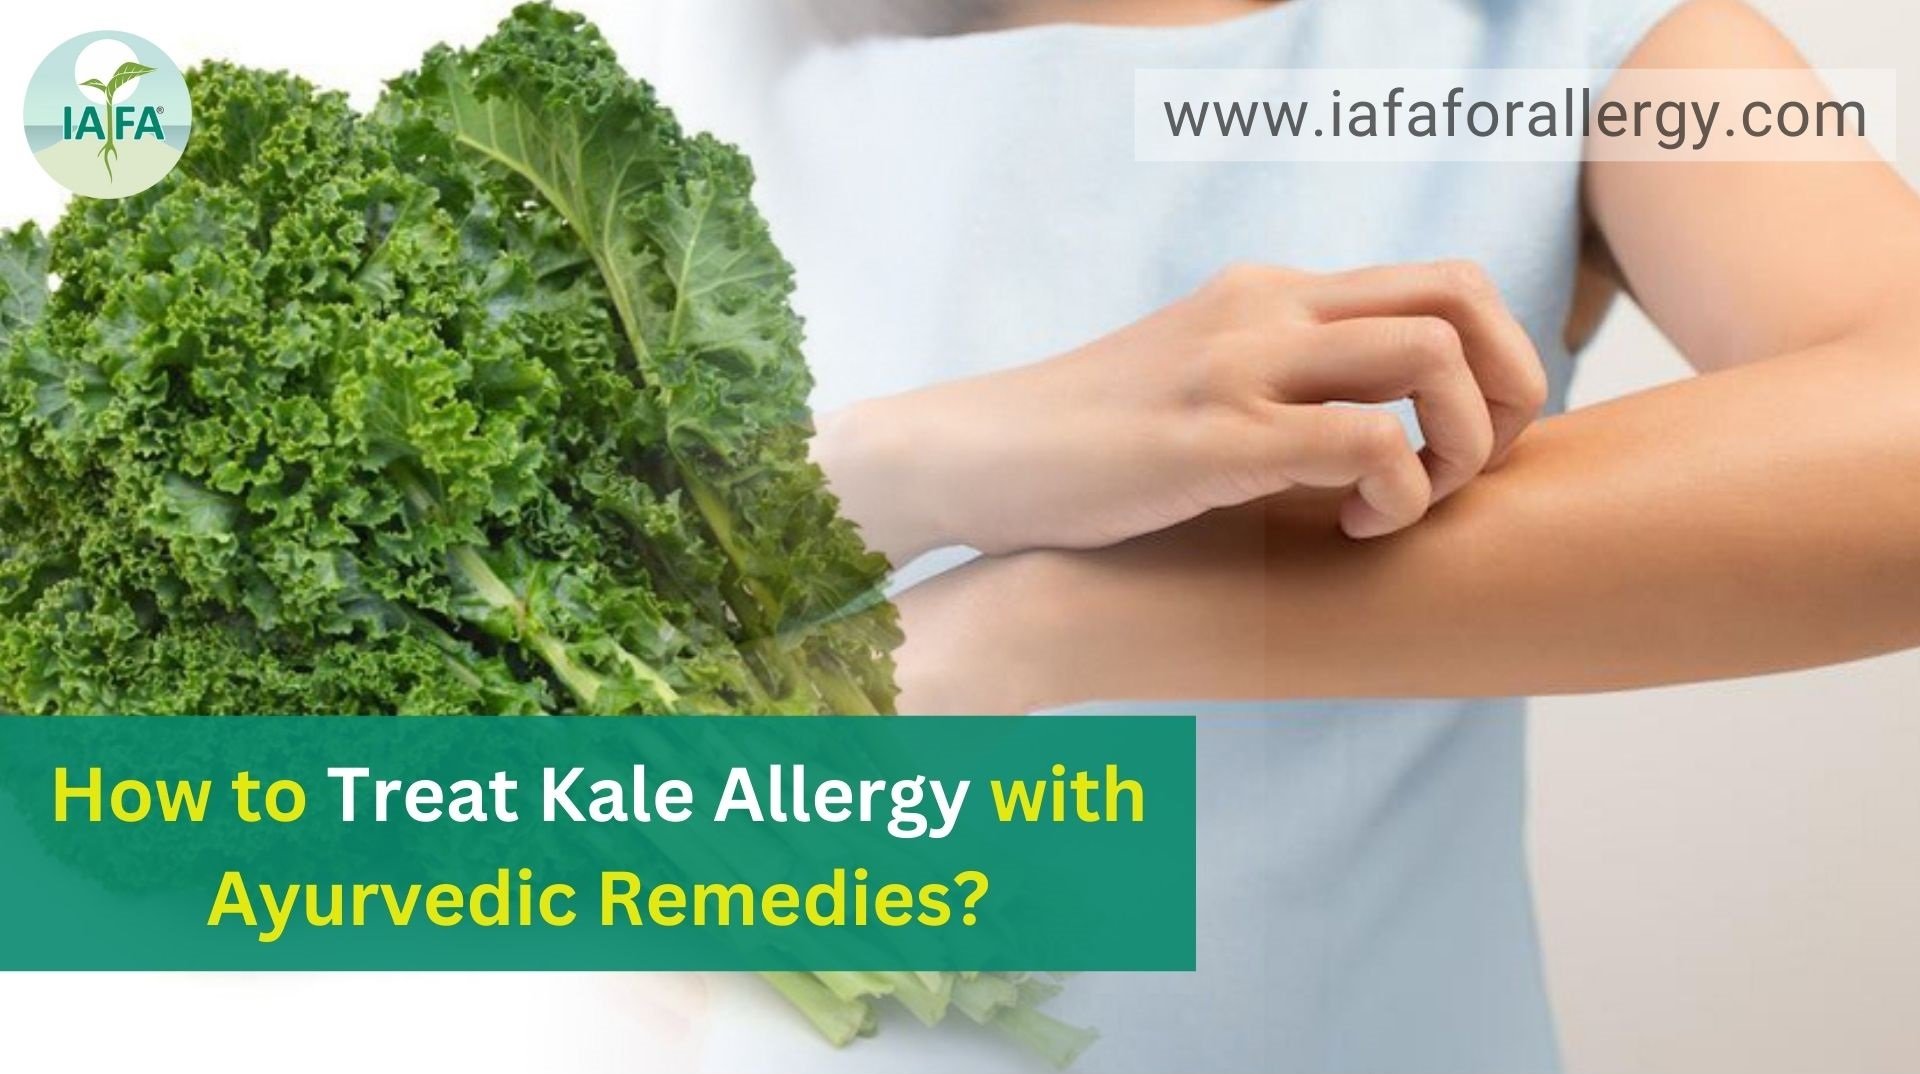 How to Treat Kale Allergy with Ayurvedic Remedies?